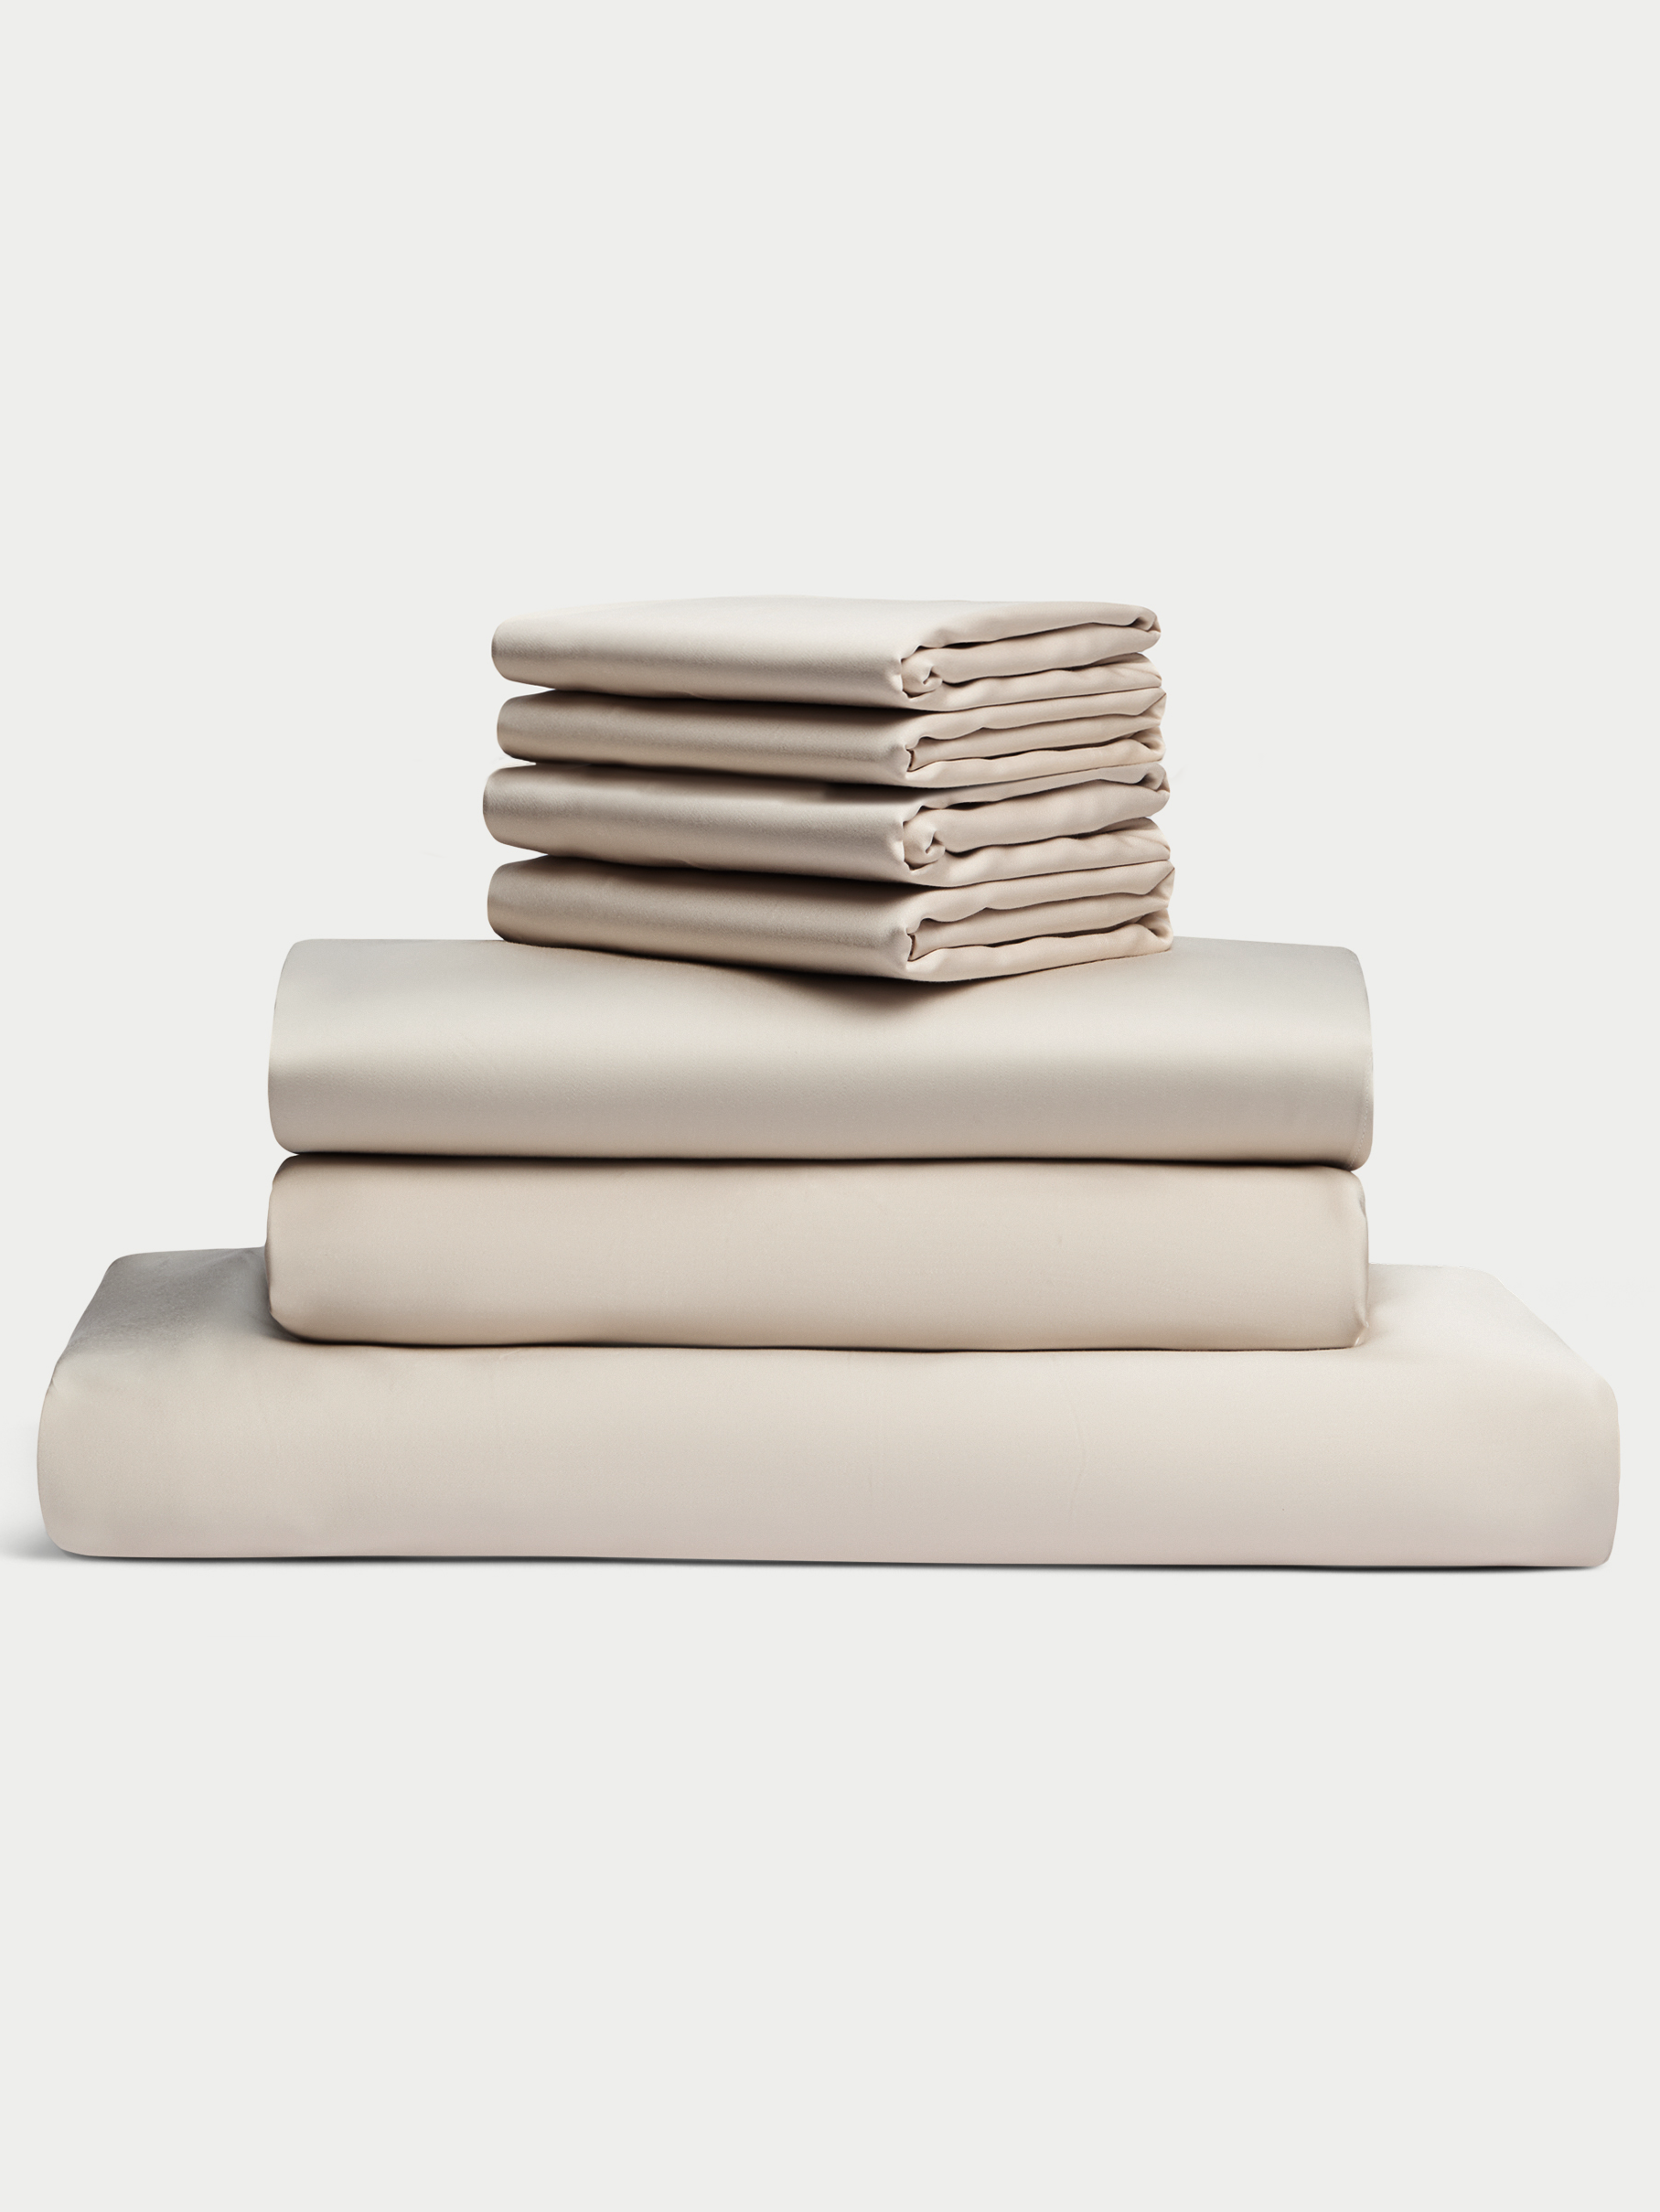 Driftwood bedding bundle stacked up with white background |Color:Driftwood